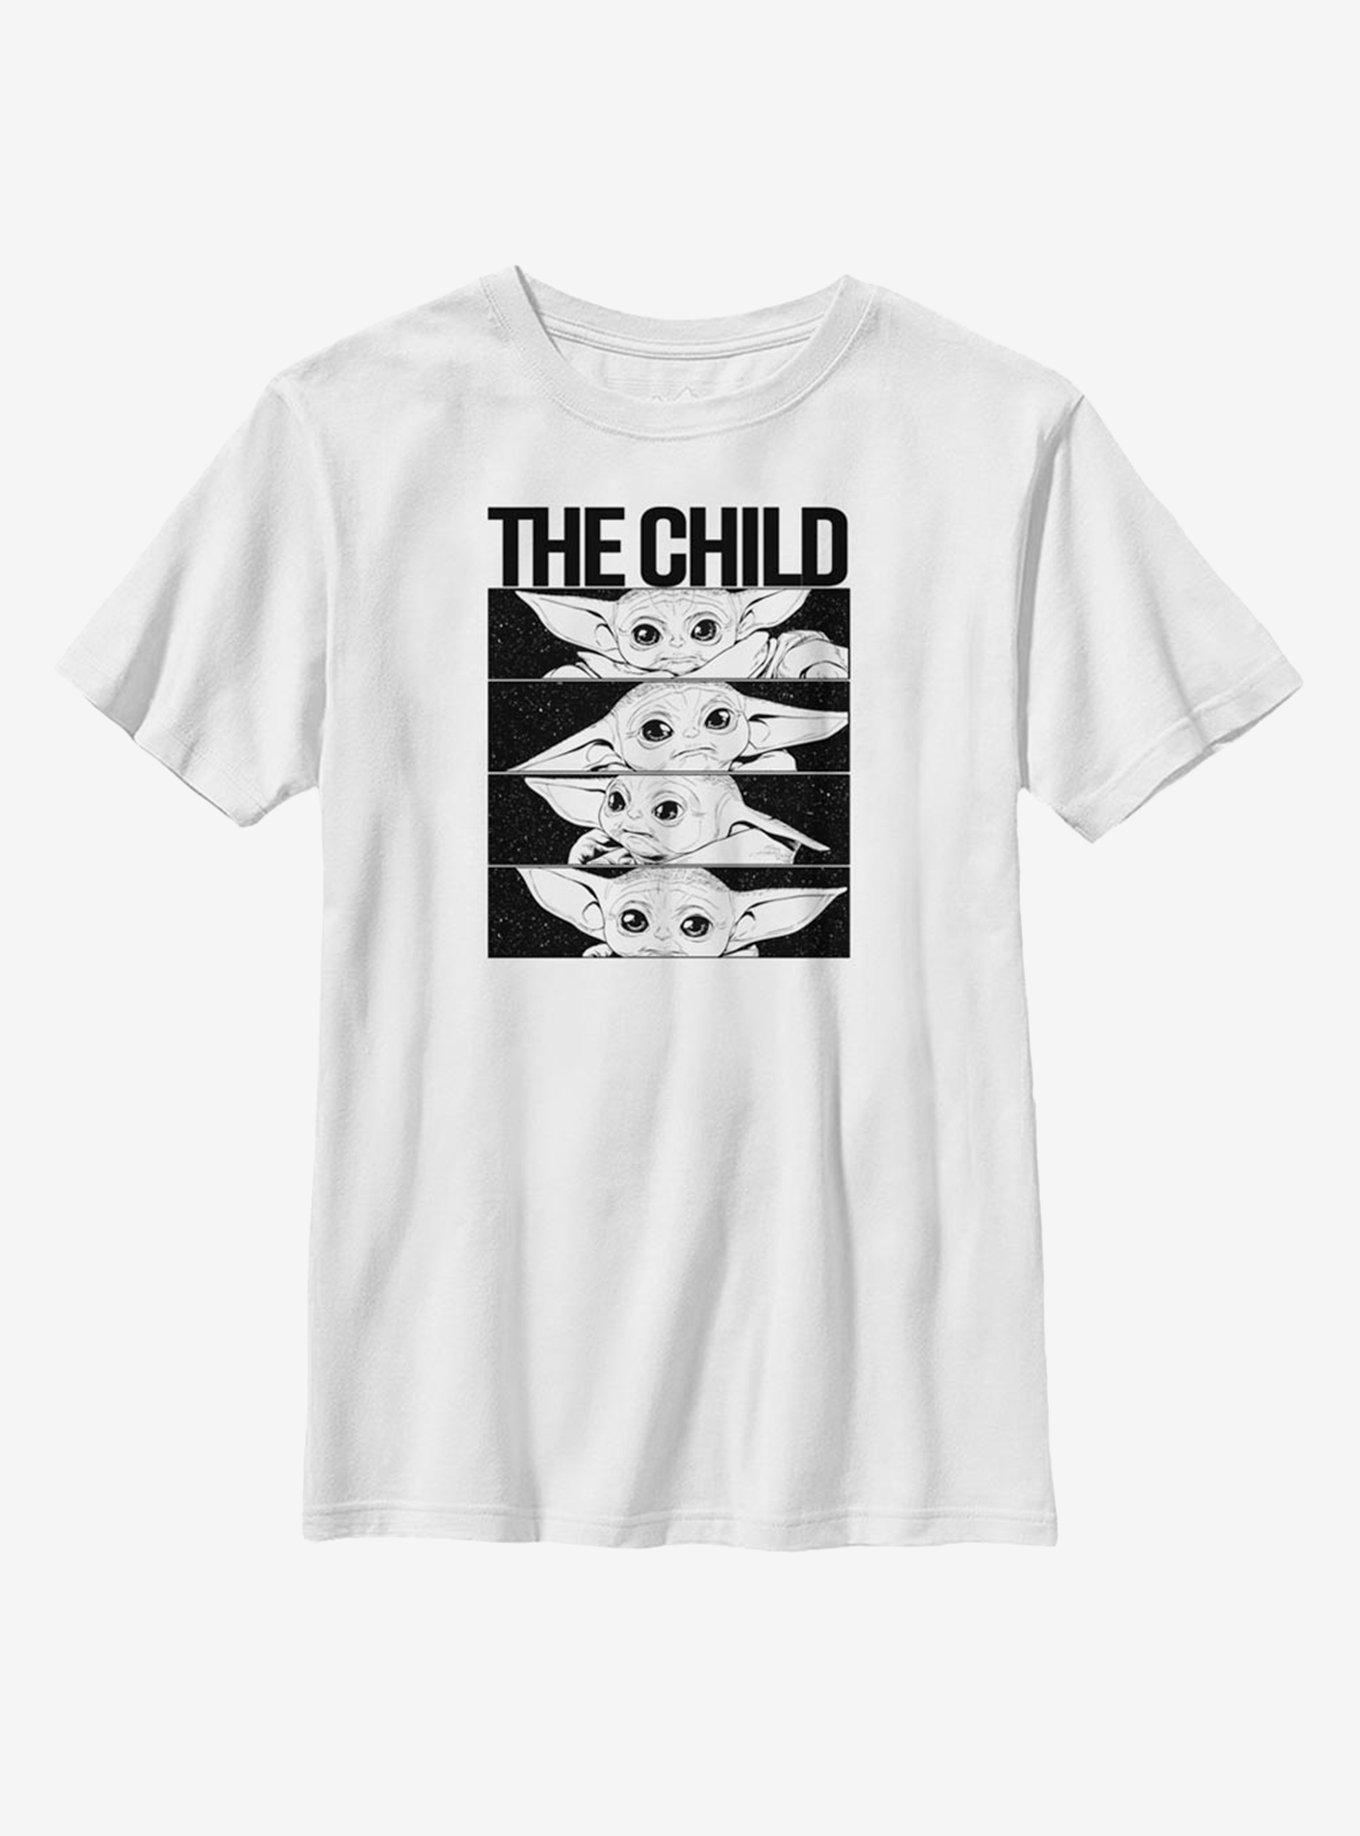 Star Wars The Mandalorian The Child Space Box Child Youth T-Shirt, WHITE, hi-res